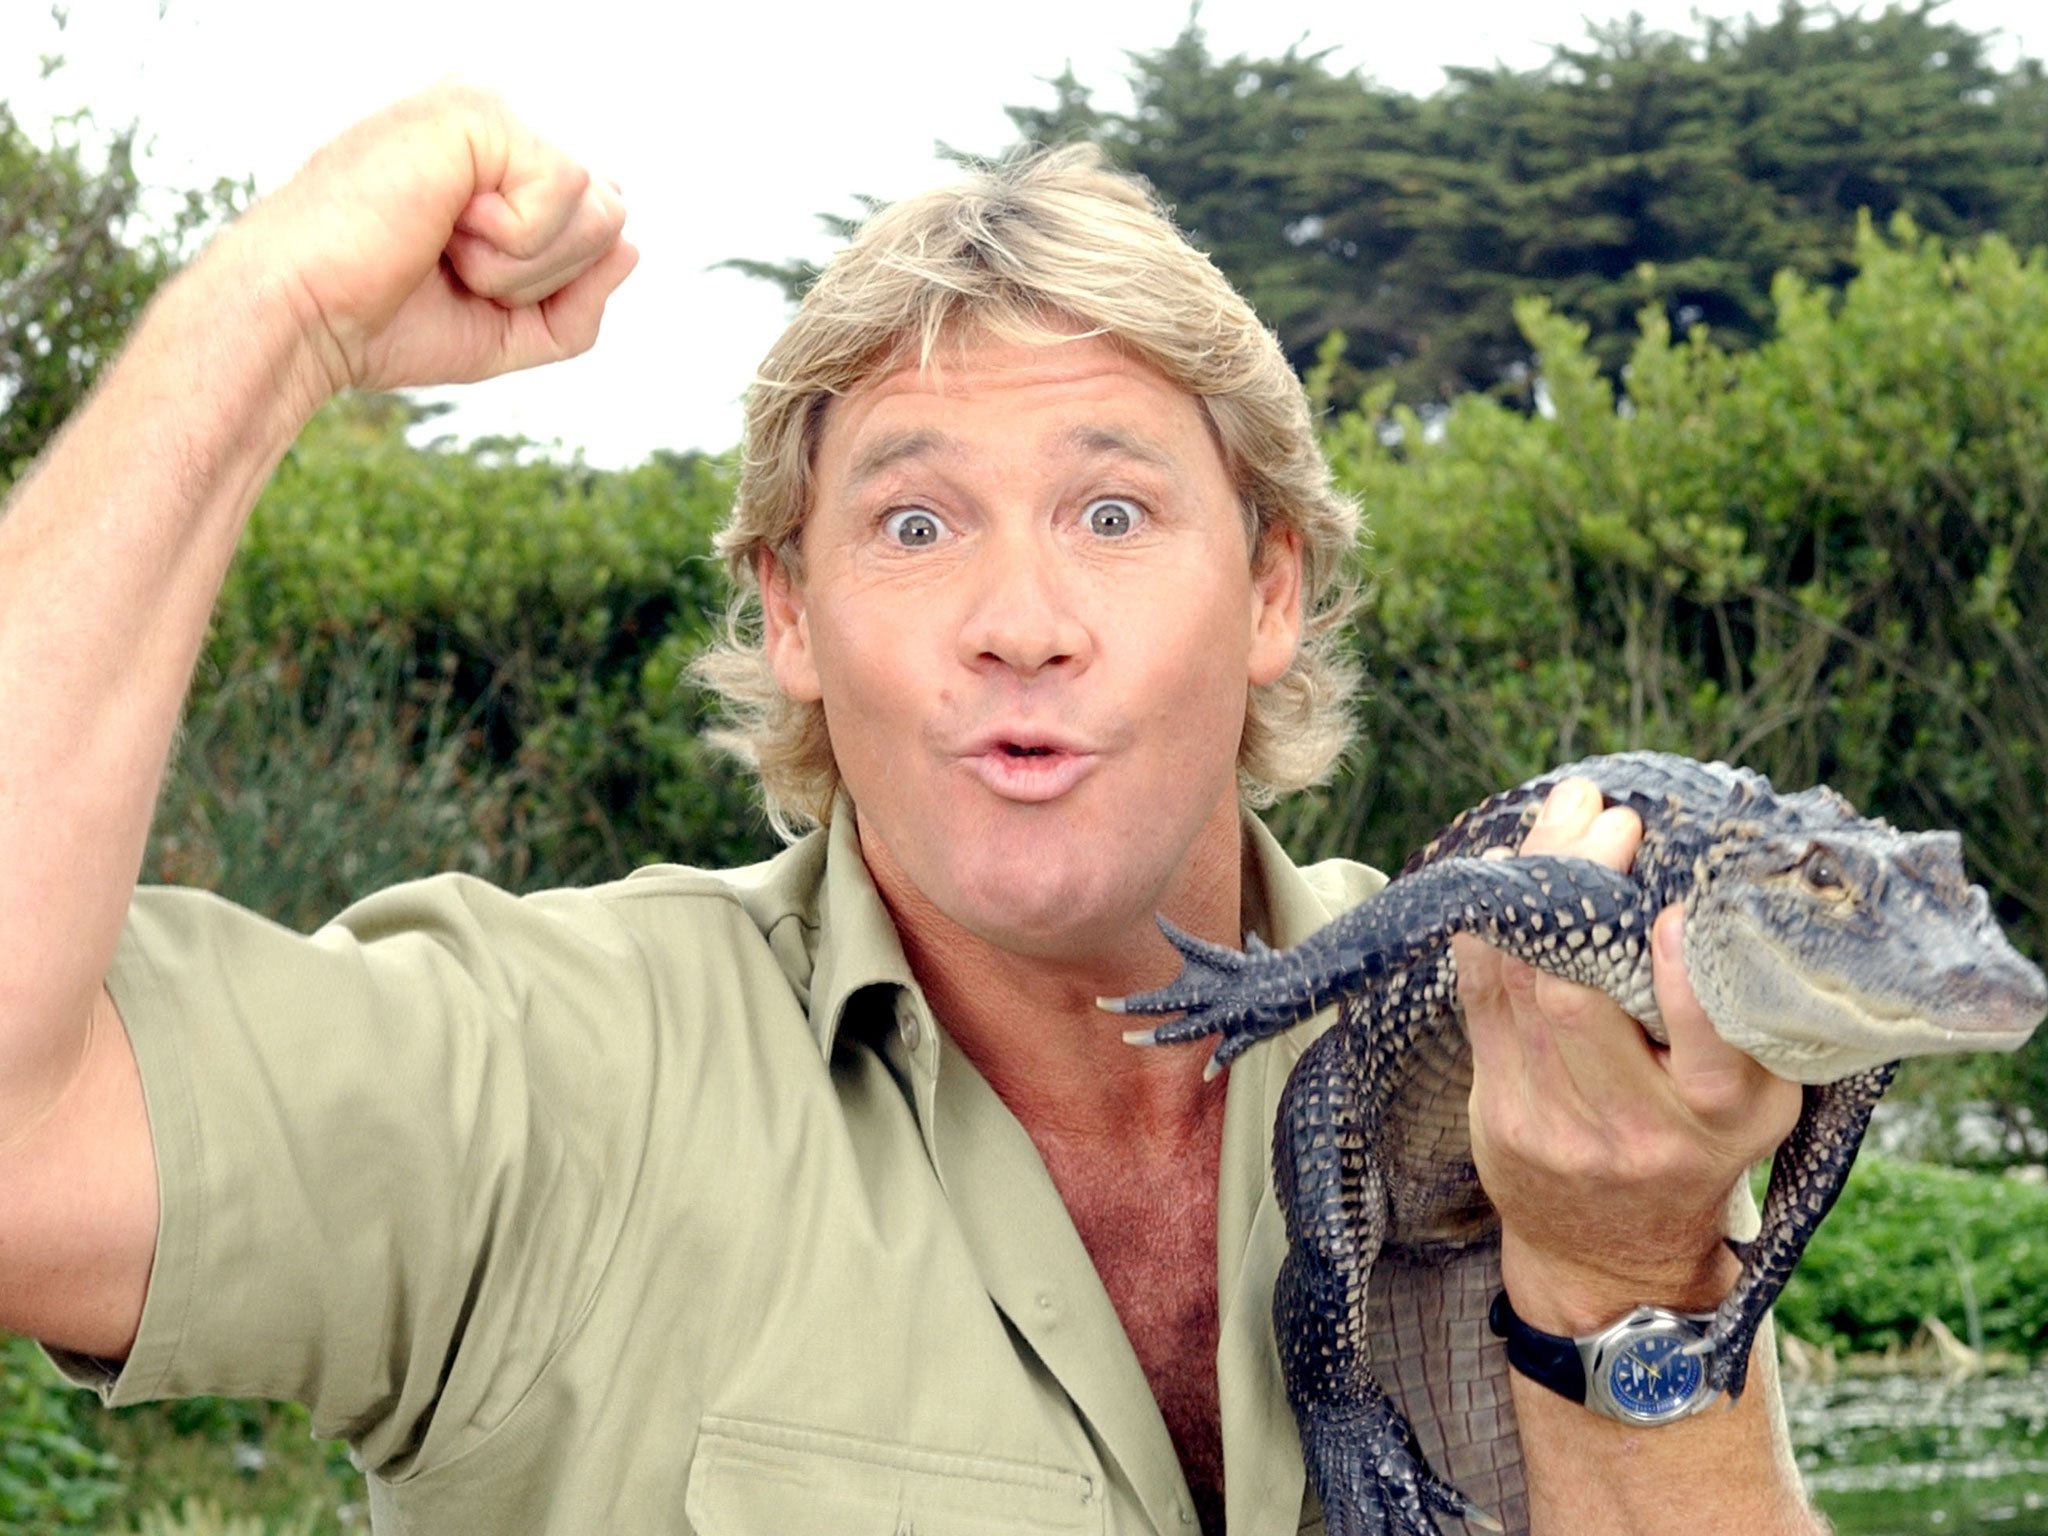 Happy 55th birthday to the guy who made me love nature, Steve Irwin. Rest in peace 